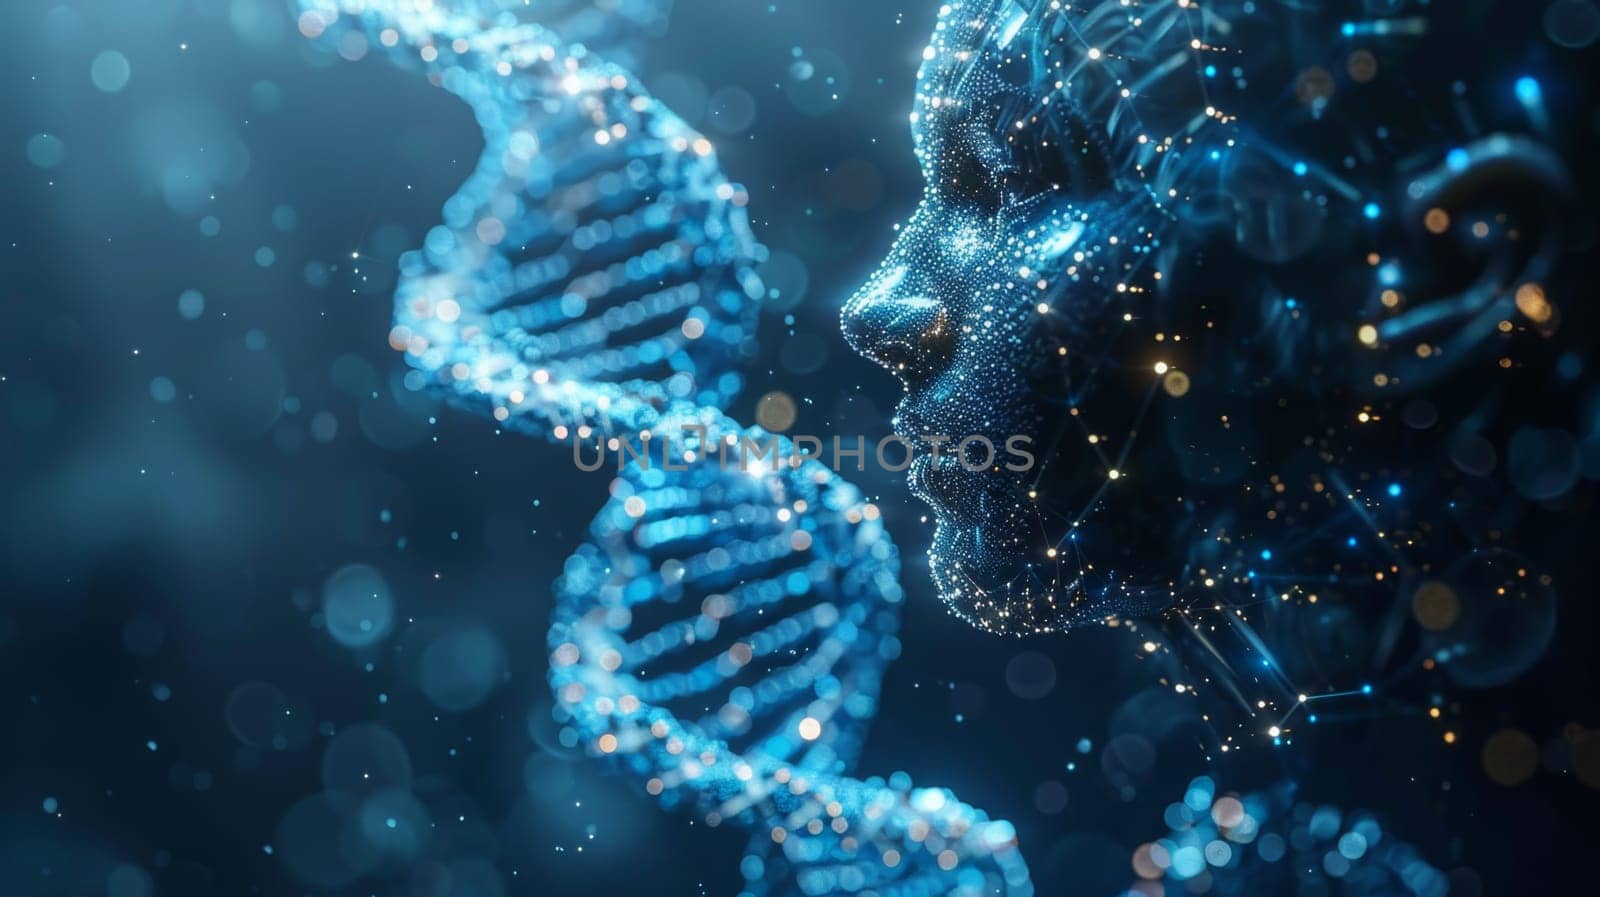 A spiral of a blue DNA double helix and a girl's face on a blue background. 3d illustration.